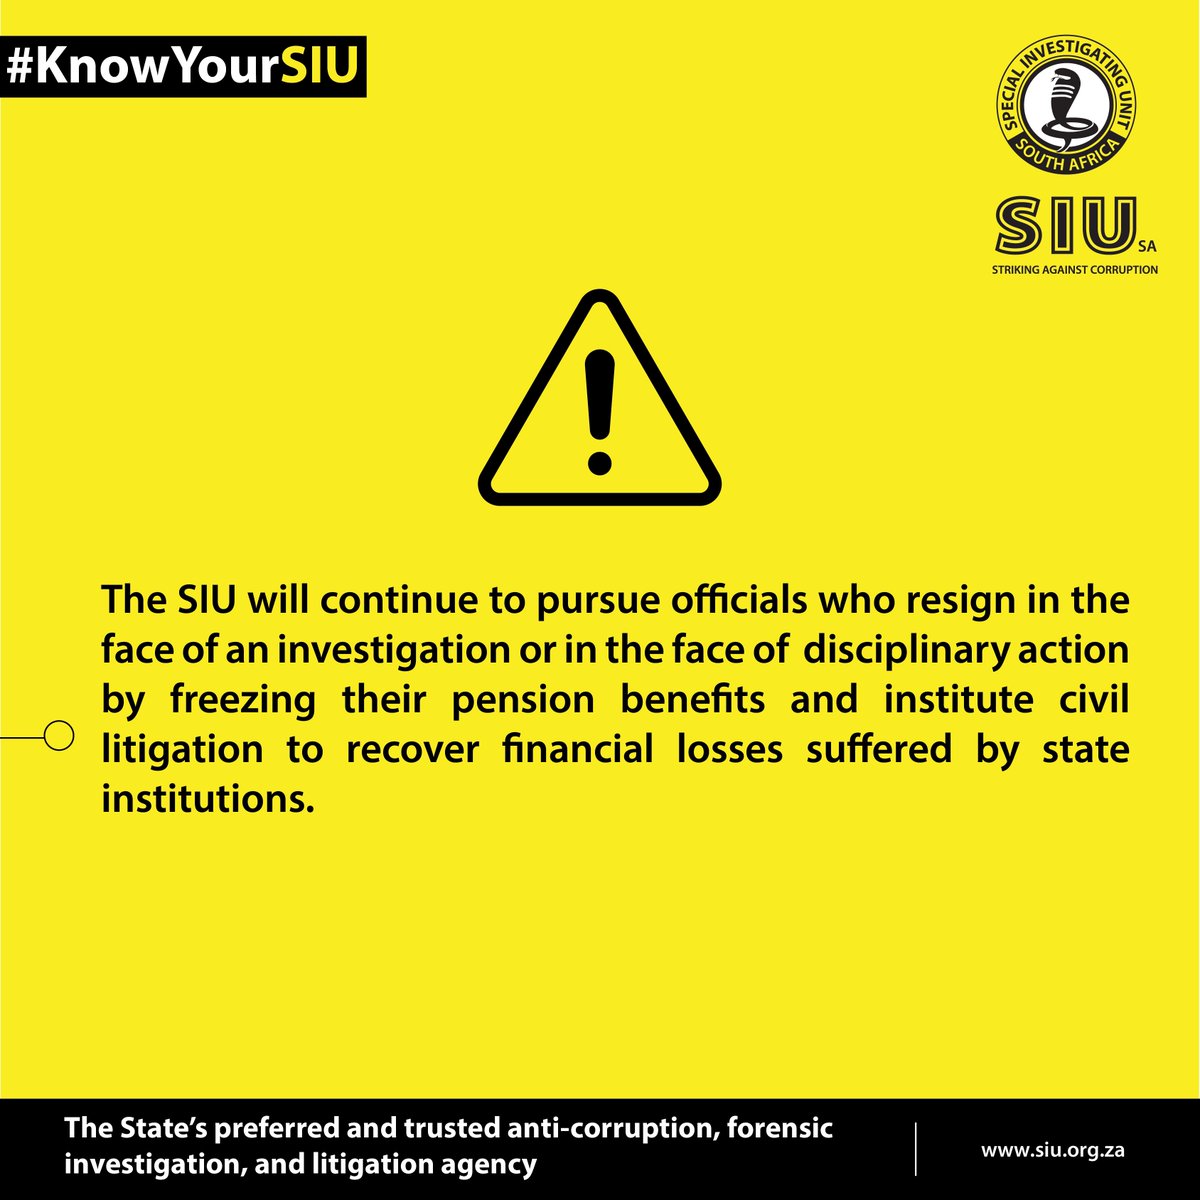 #KnowYourSIU| Resigning in the face of an investigation will not stop the SIU from doing its work.